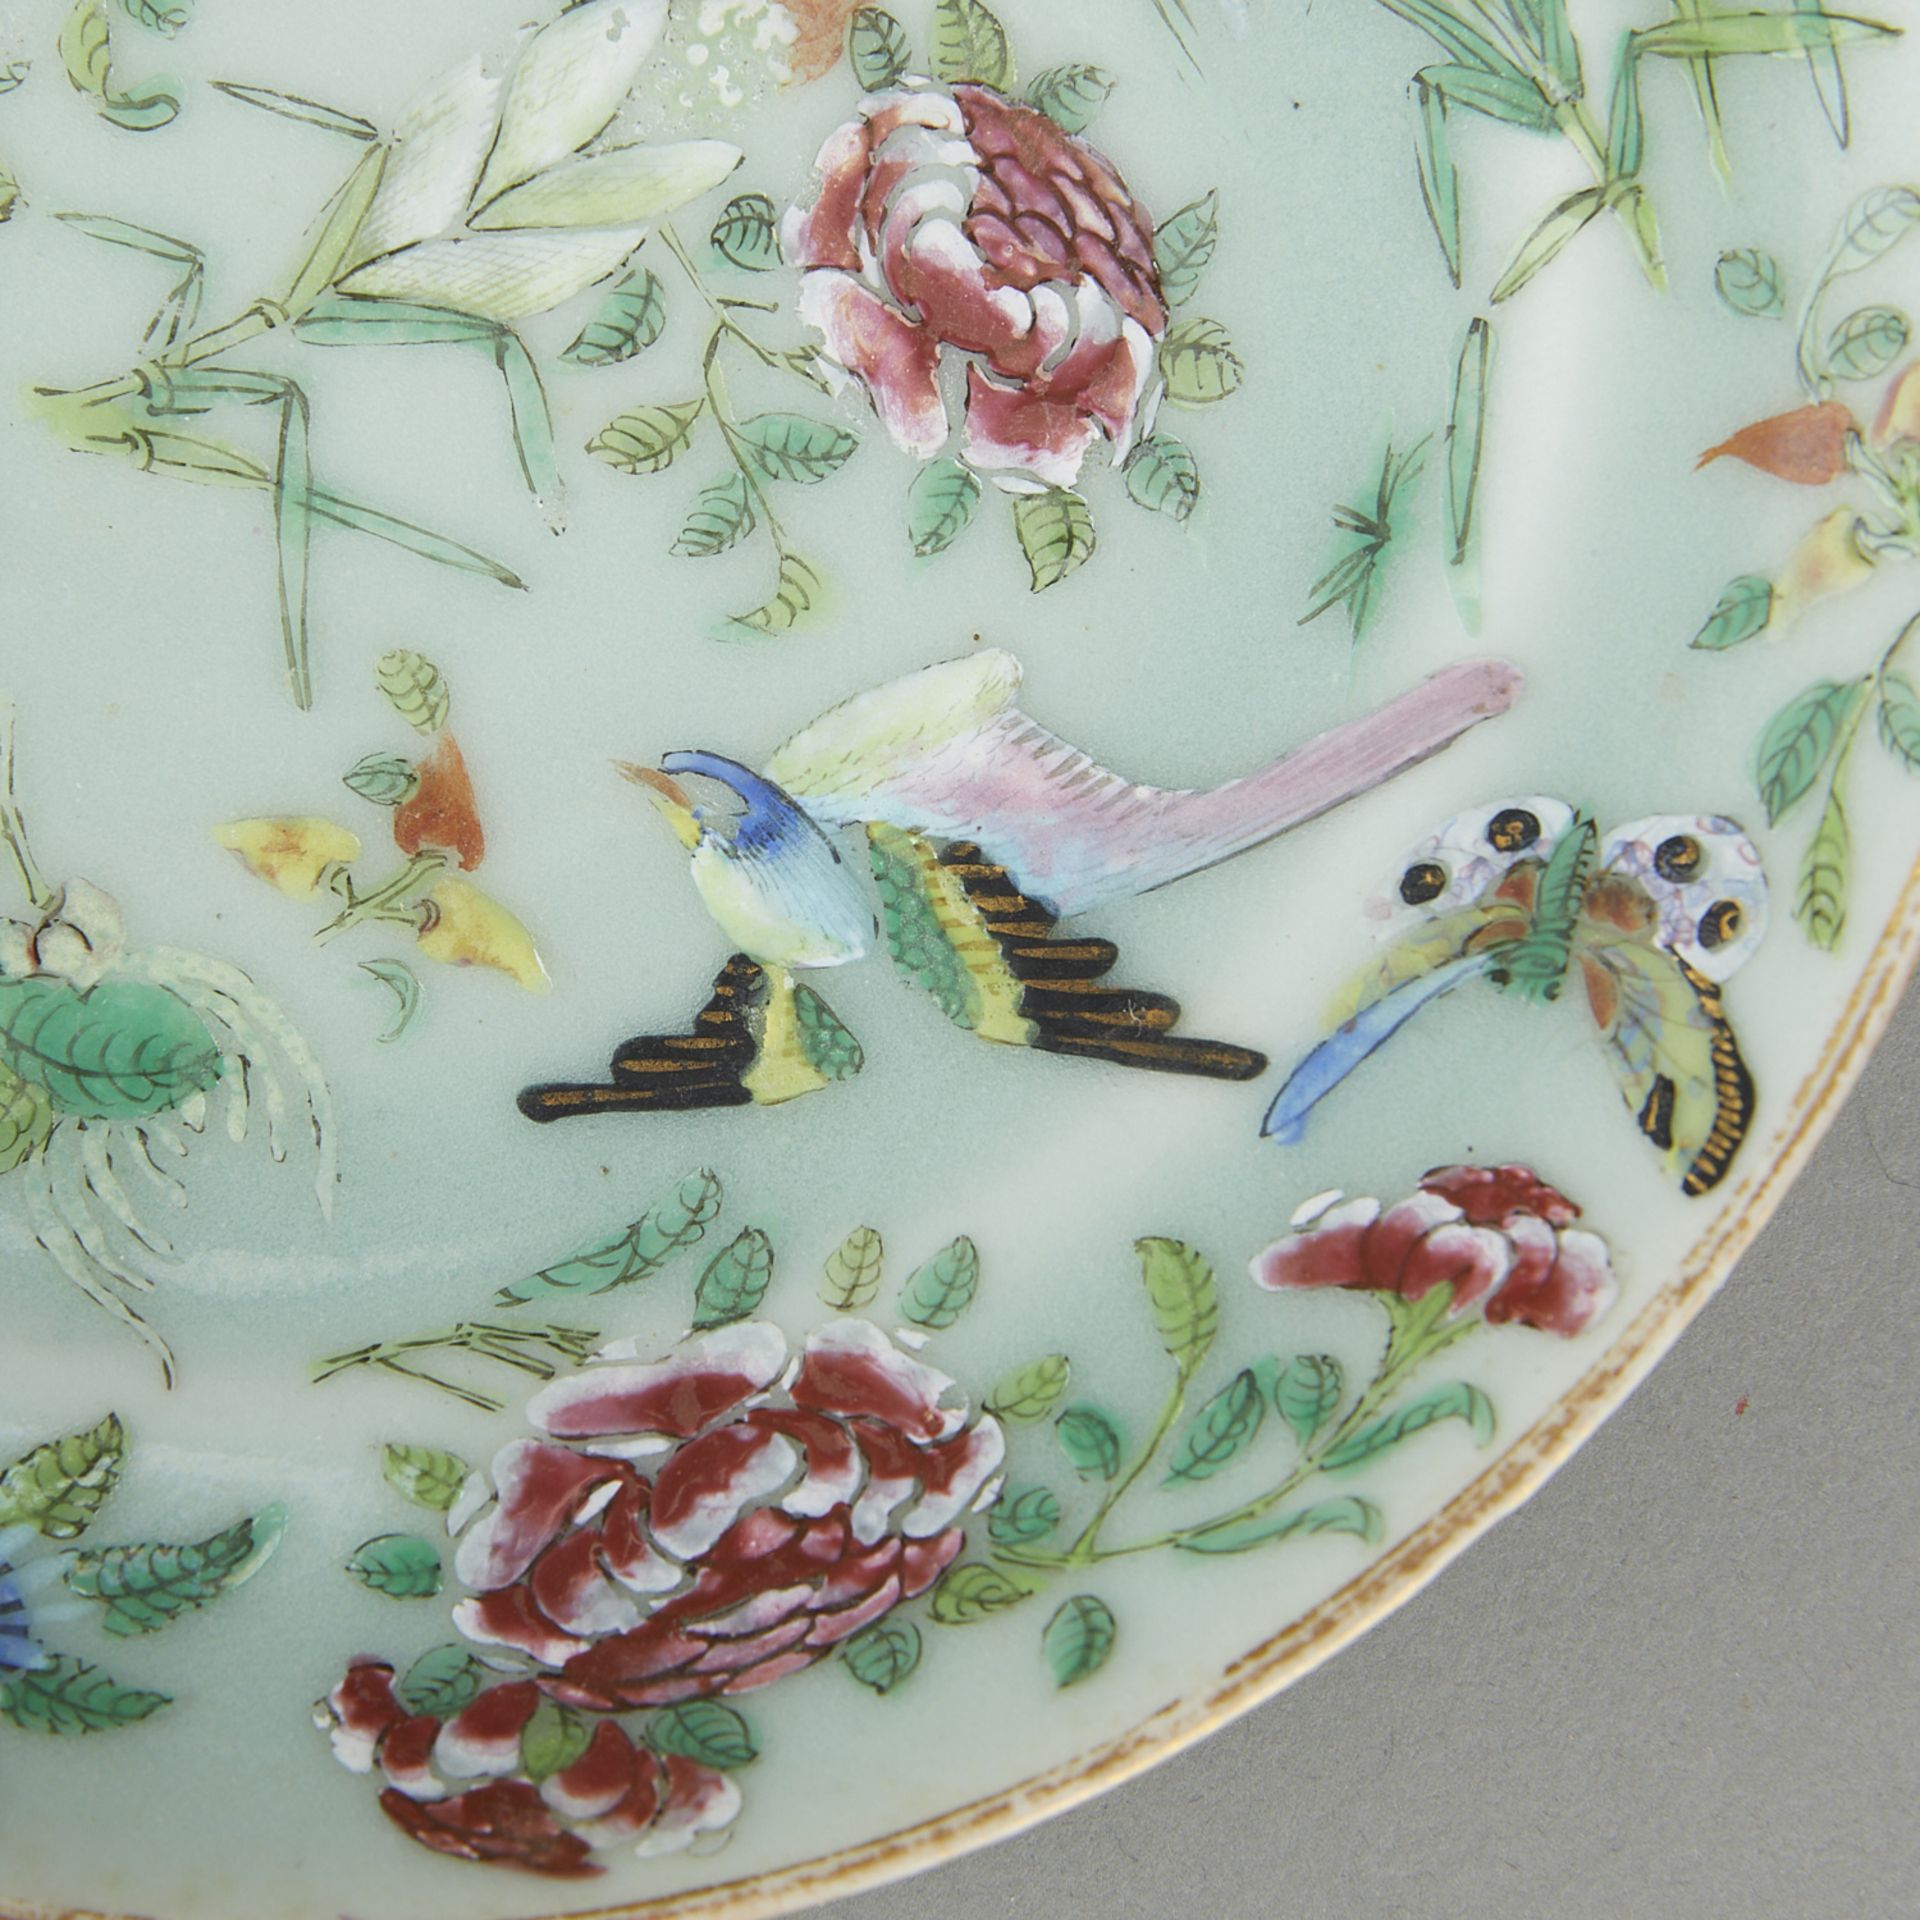 8 Antique Chinese Porcelain Plates and Bowls - Image 6 of 23